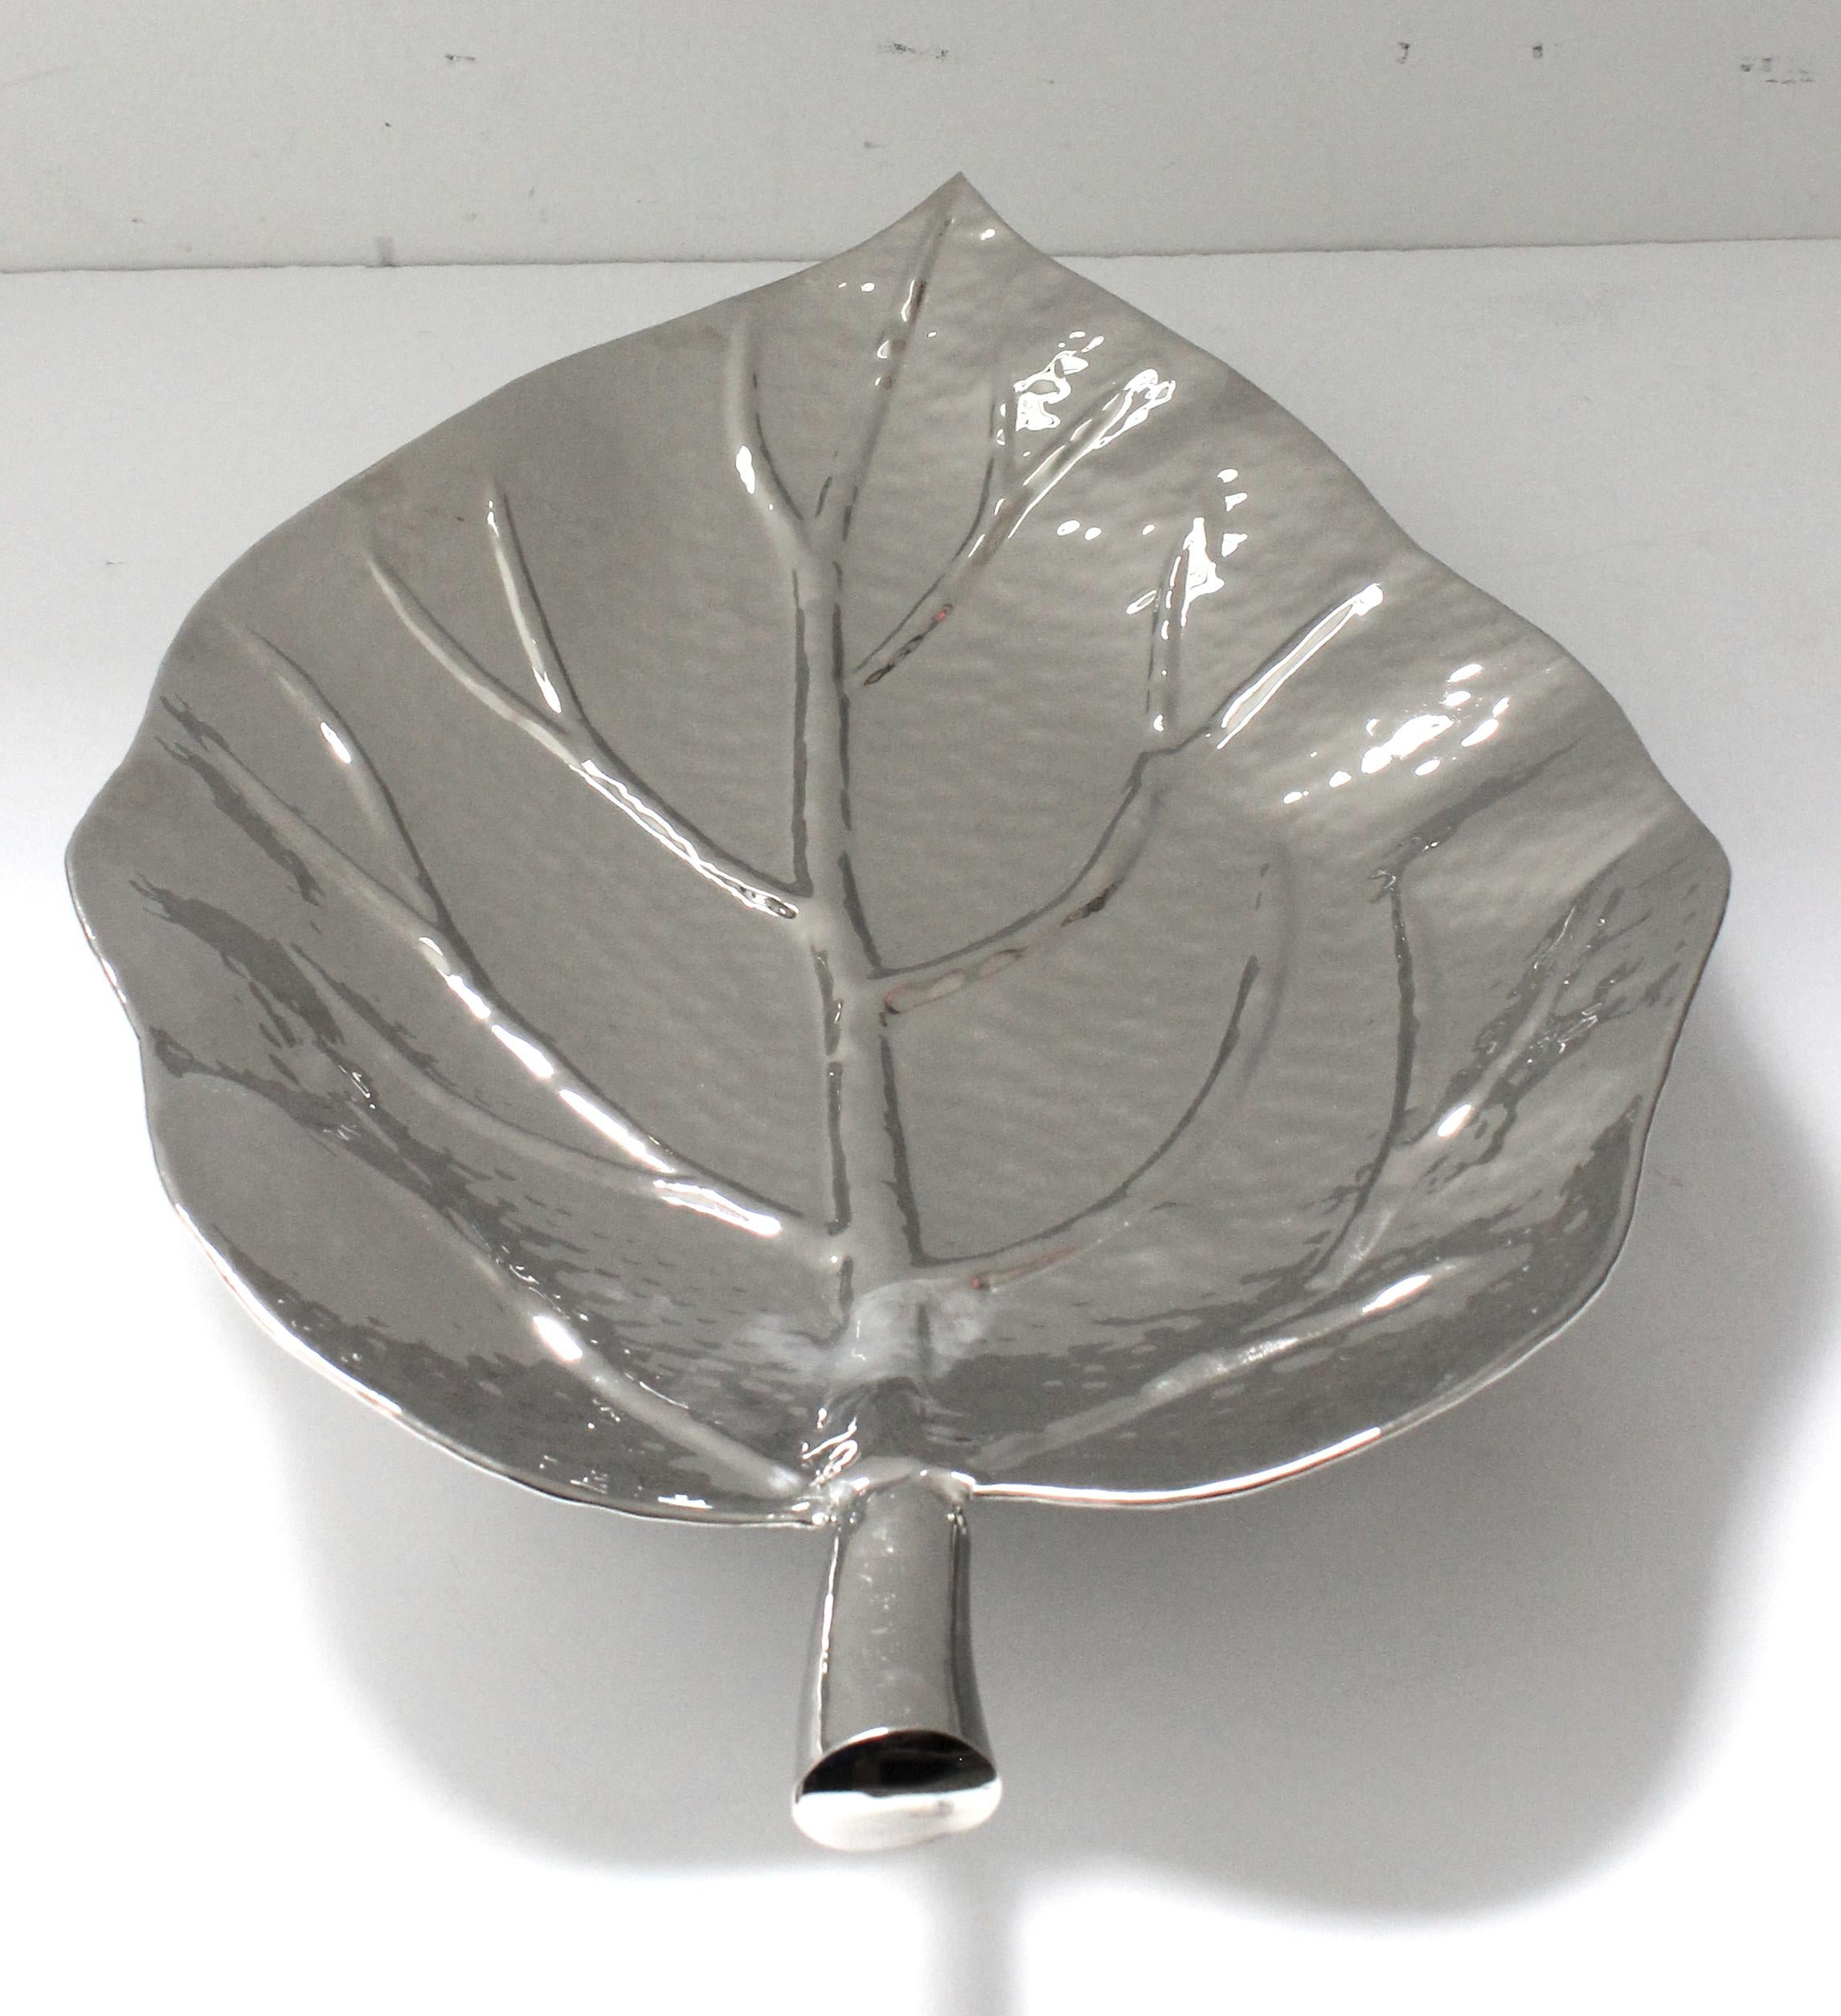 Modern Nickel Plated Leaf Form Serving Tray by Iconic Snob Galeries For Sale